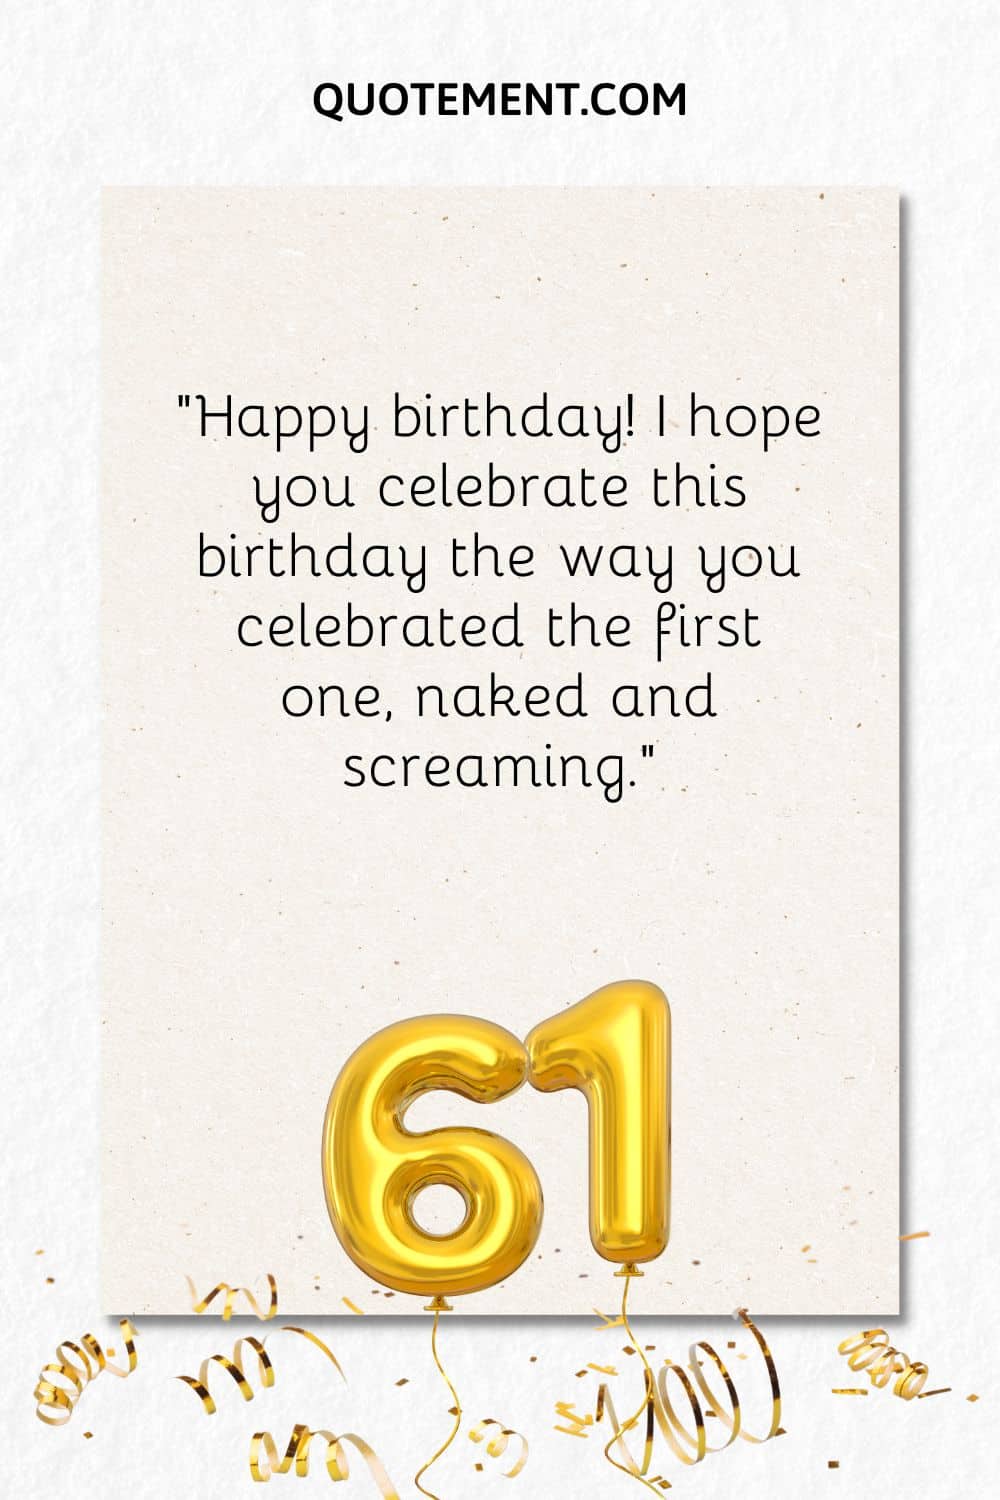 “Happy birthday! I hope you celebrate this birthday the way you celebrated the first one, naked and screaming.”